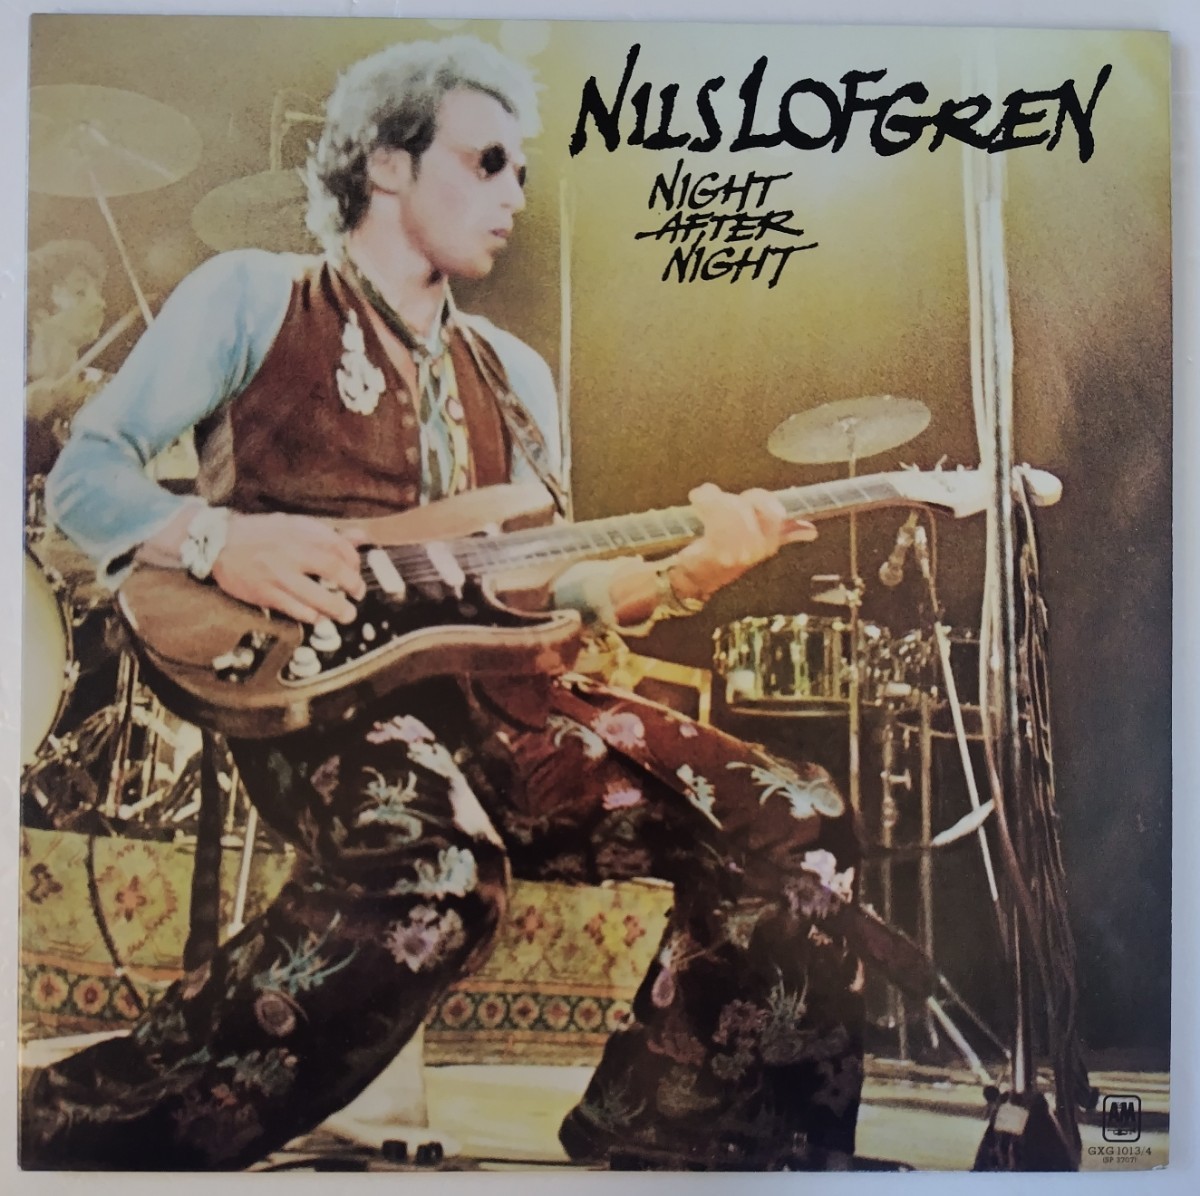 Nils Lofgren Night After Night/1977 year domestic record 2 sheets set A&M Records GXG 1013/14